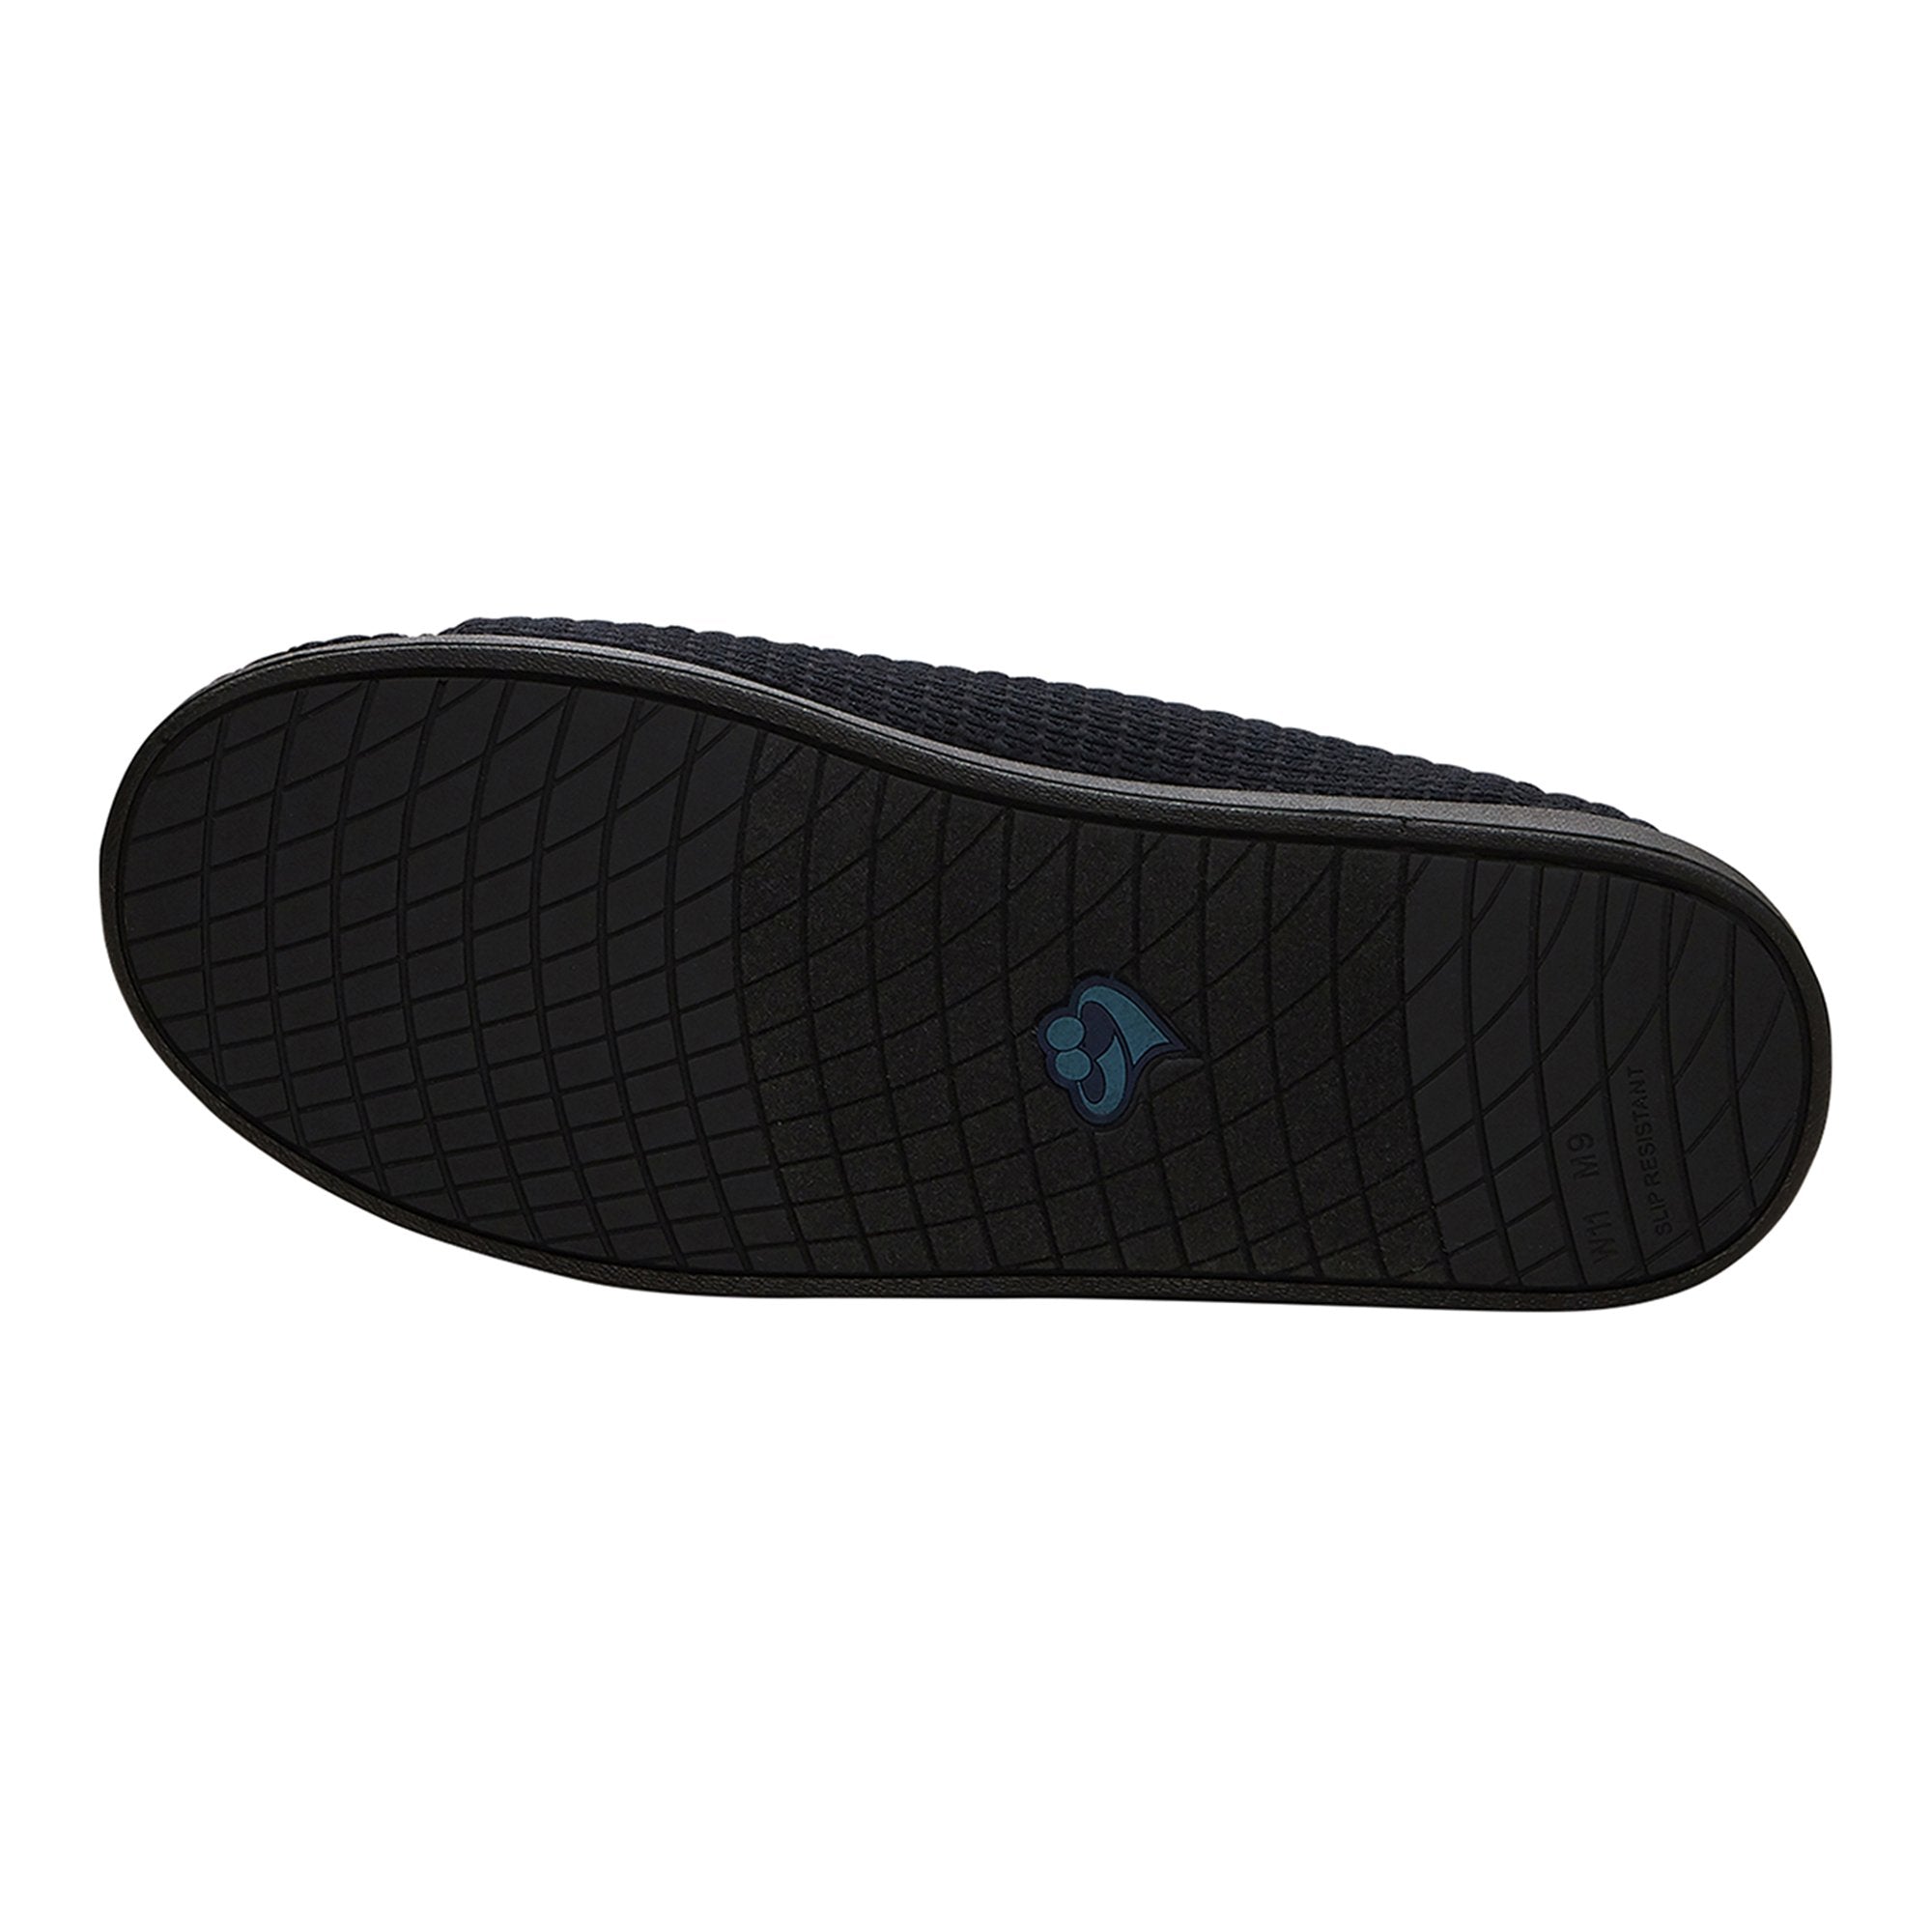 Slippers Silverts® Size 12 / 2X-Wide Black